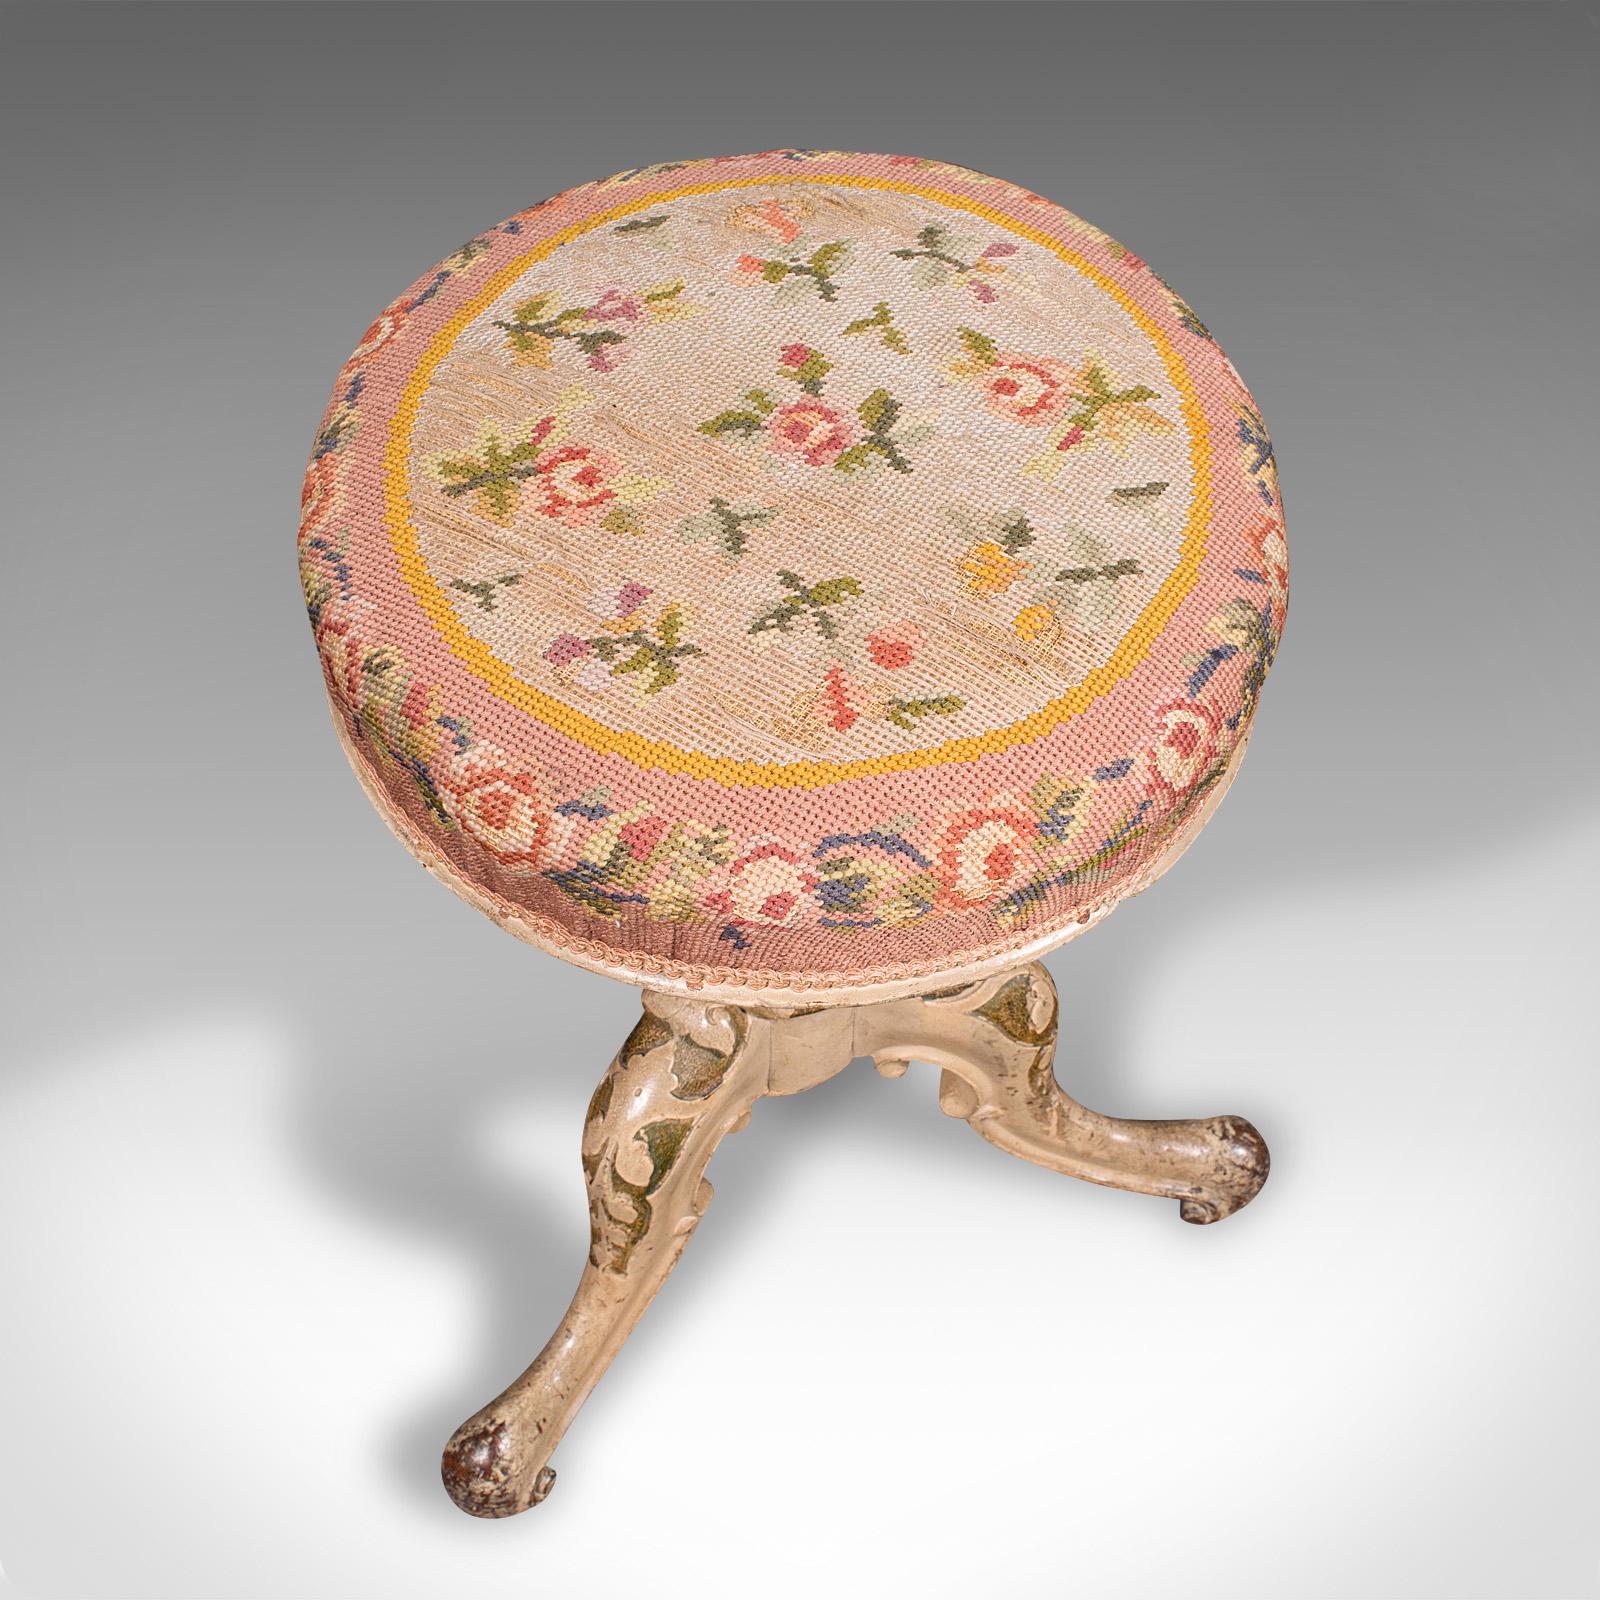 Wood Antique Piano Stool, English, Painted Frame, Music Seat, Riser, Victorian, 1850 For Sale